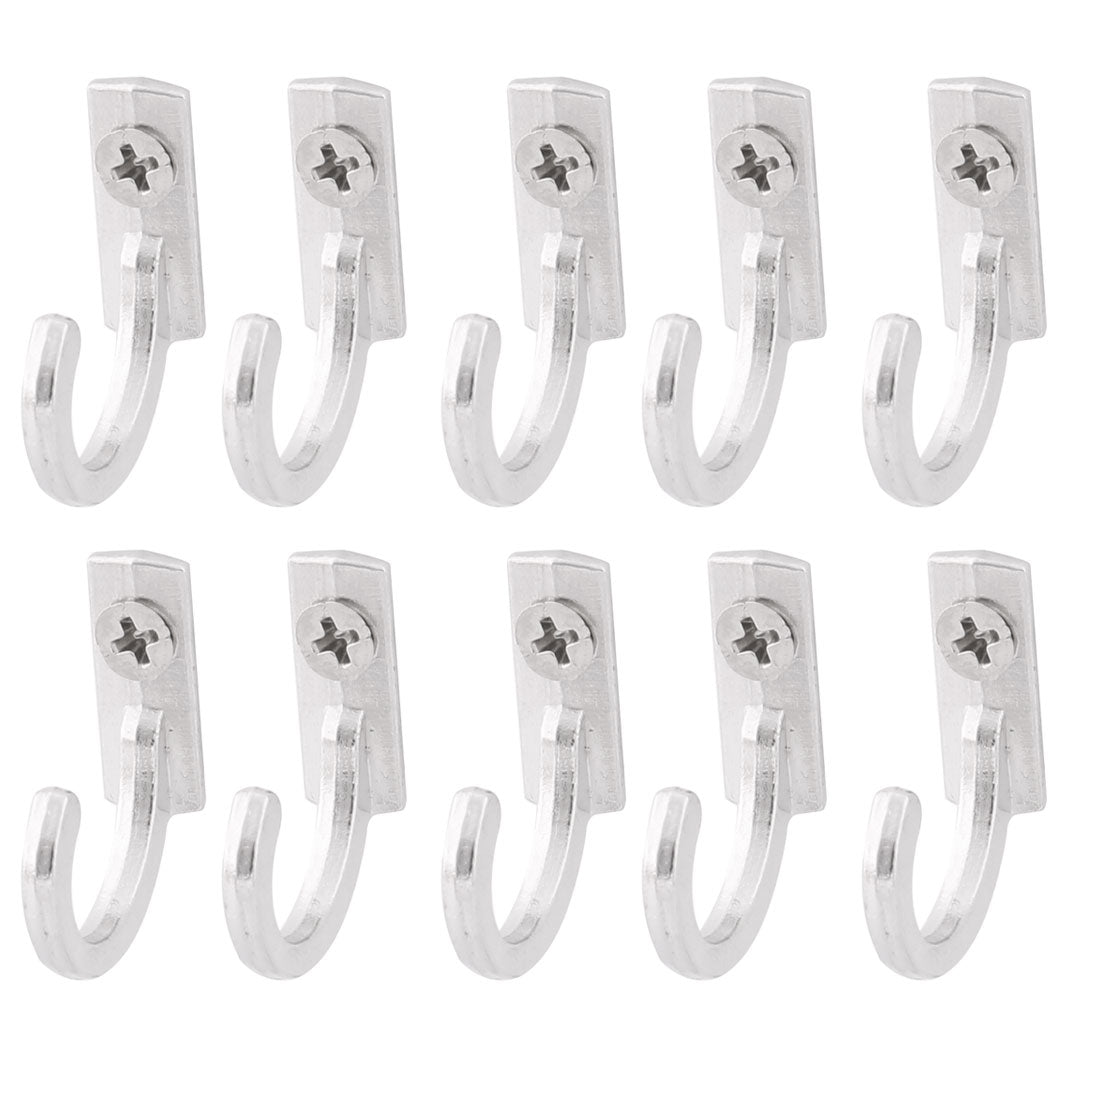 uxcell Uxcell Clothes Coat Metal Wall Mounted Single Storage Hook Hangers Silver Tone 10pcs